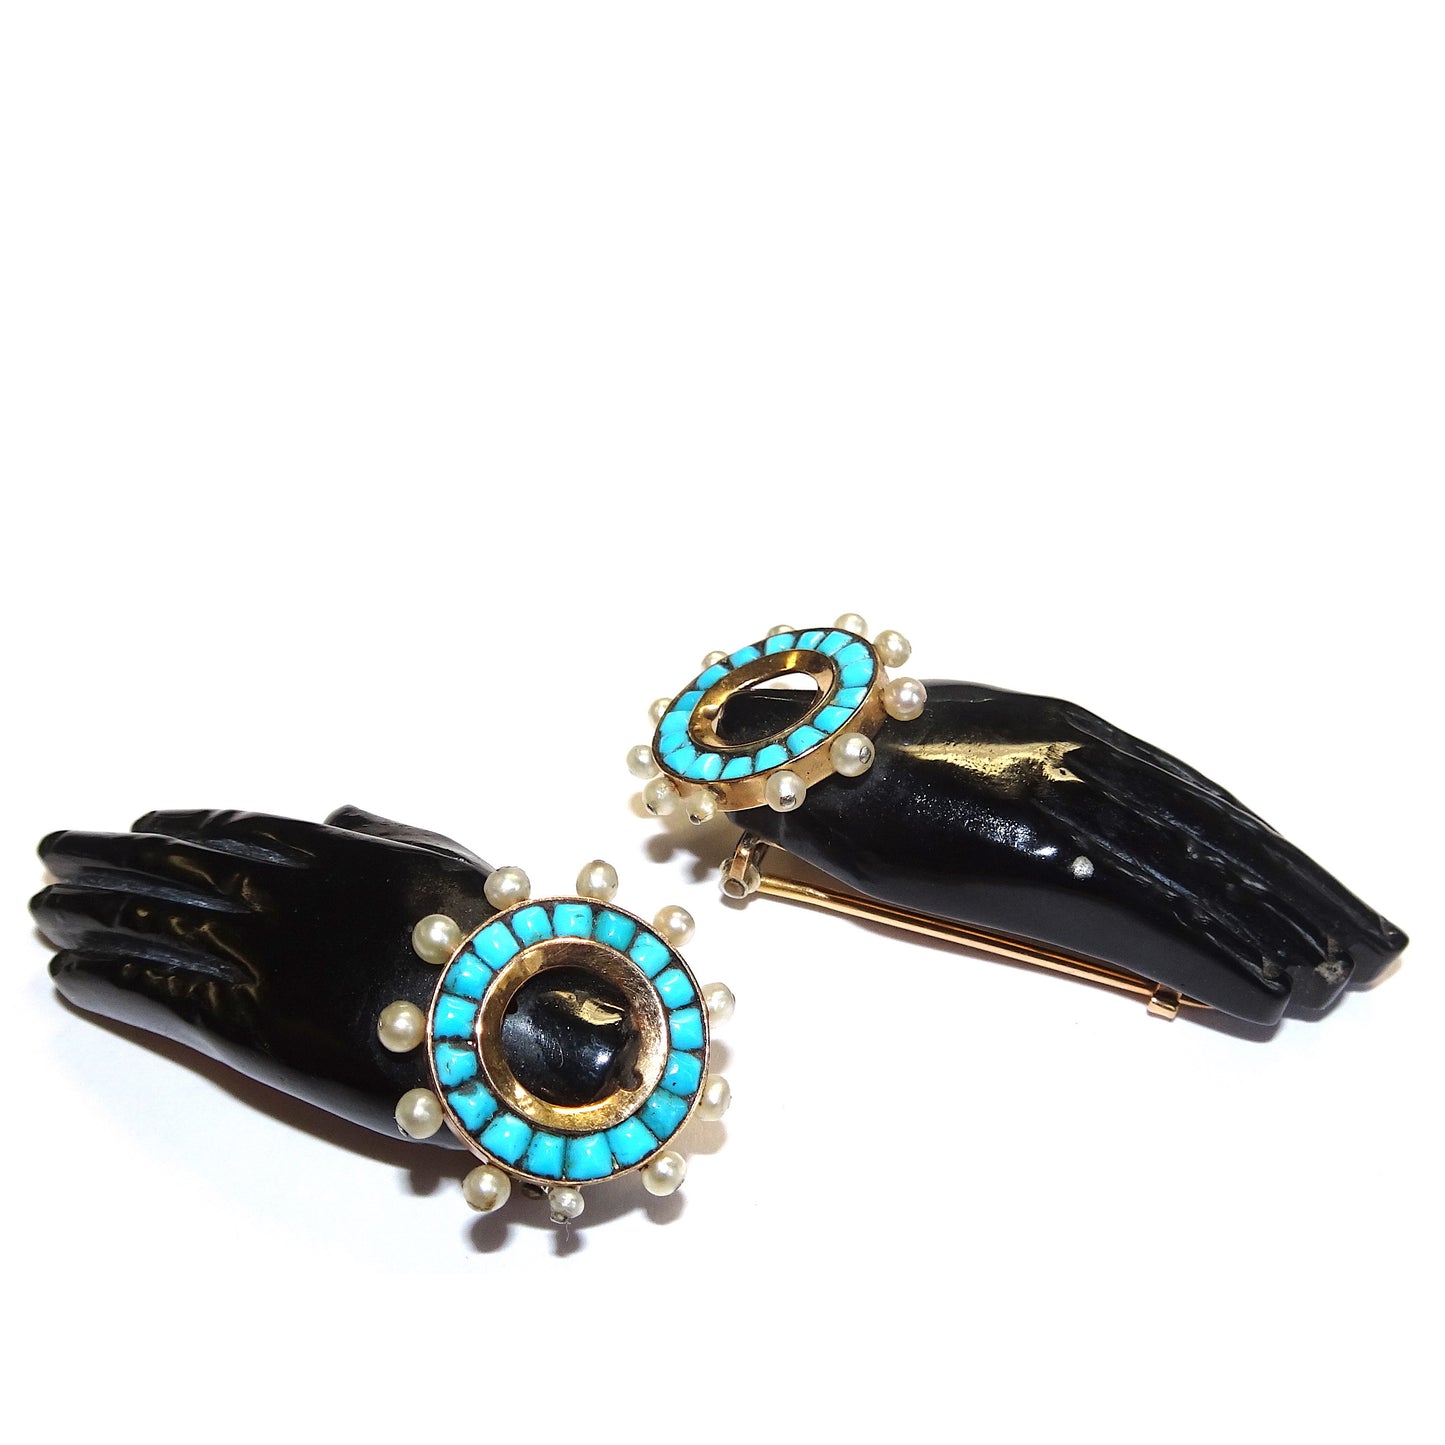 Rene Boivin French 1930s 18KT Yellow Gold Black Coral, Natural Pearl & Turquoise Hand Brooches side